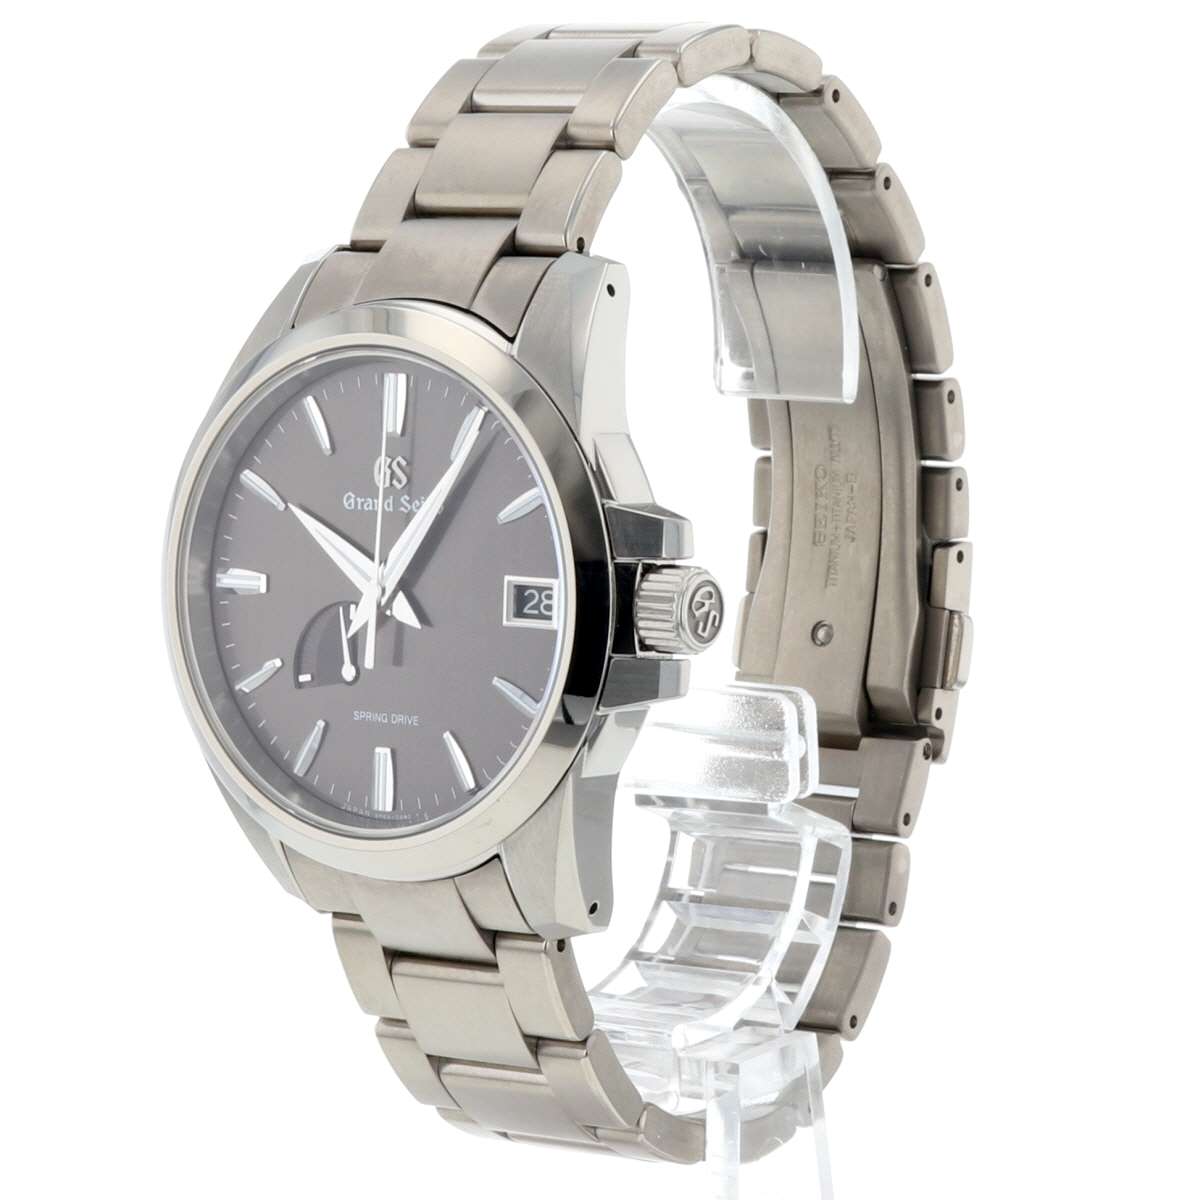 Grand Seiko Spring Drive Heritage Collection SBGA281 - Japanese-Online-Store (JOS)